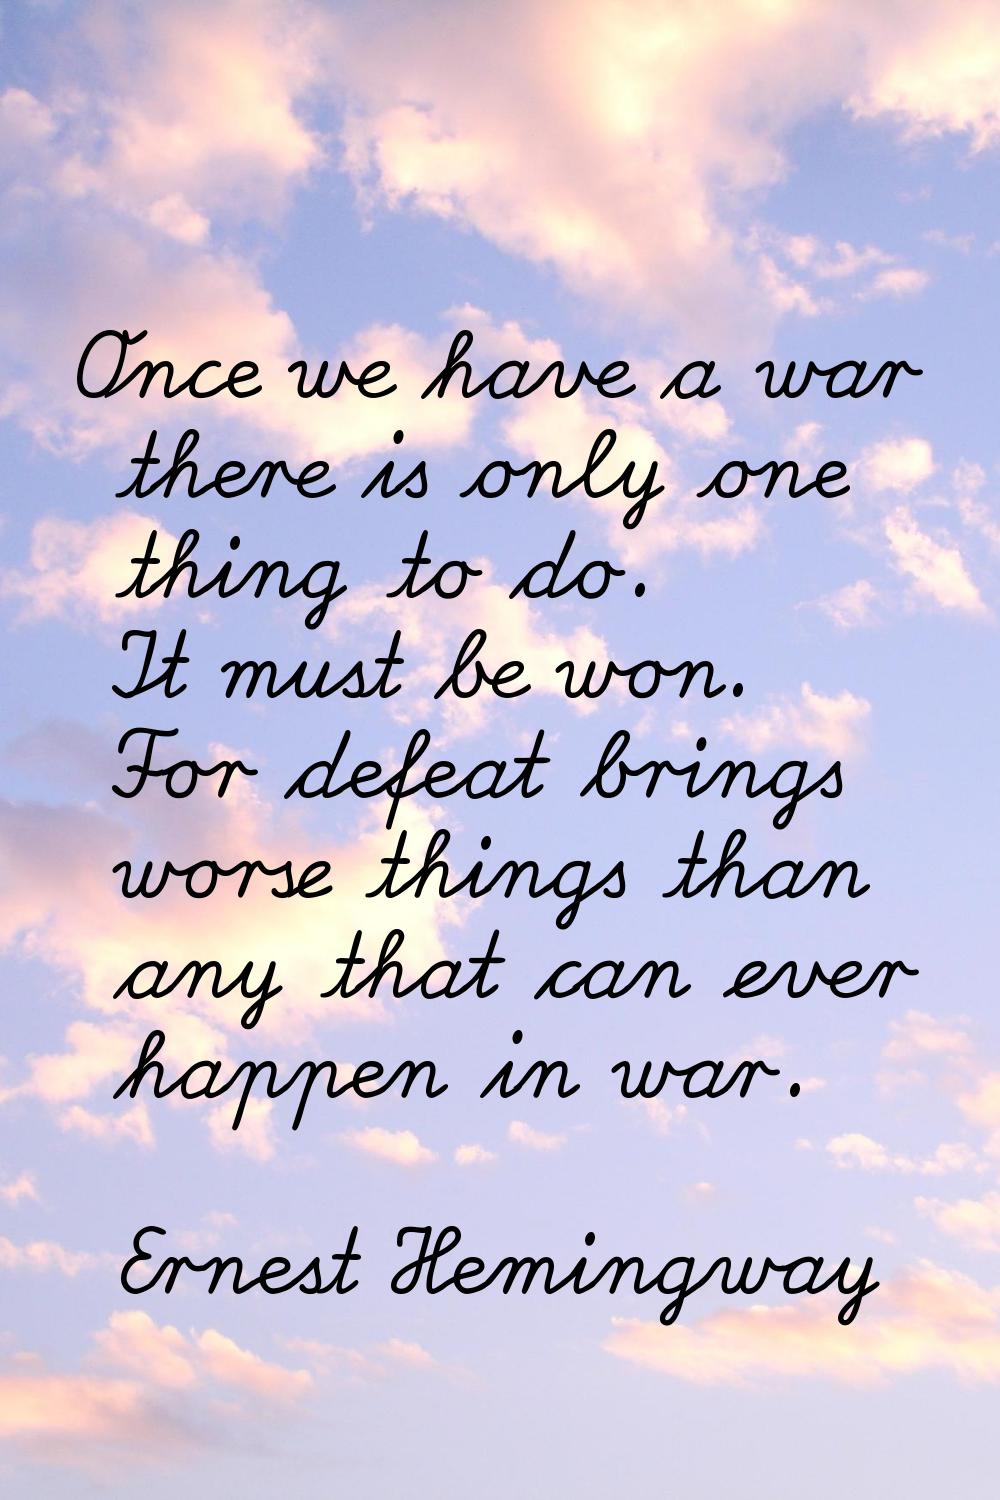 Once we have a war there is only one thing to do. It must be won. For defeat brings worse things th